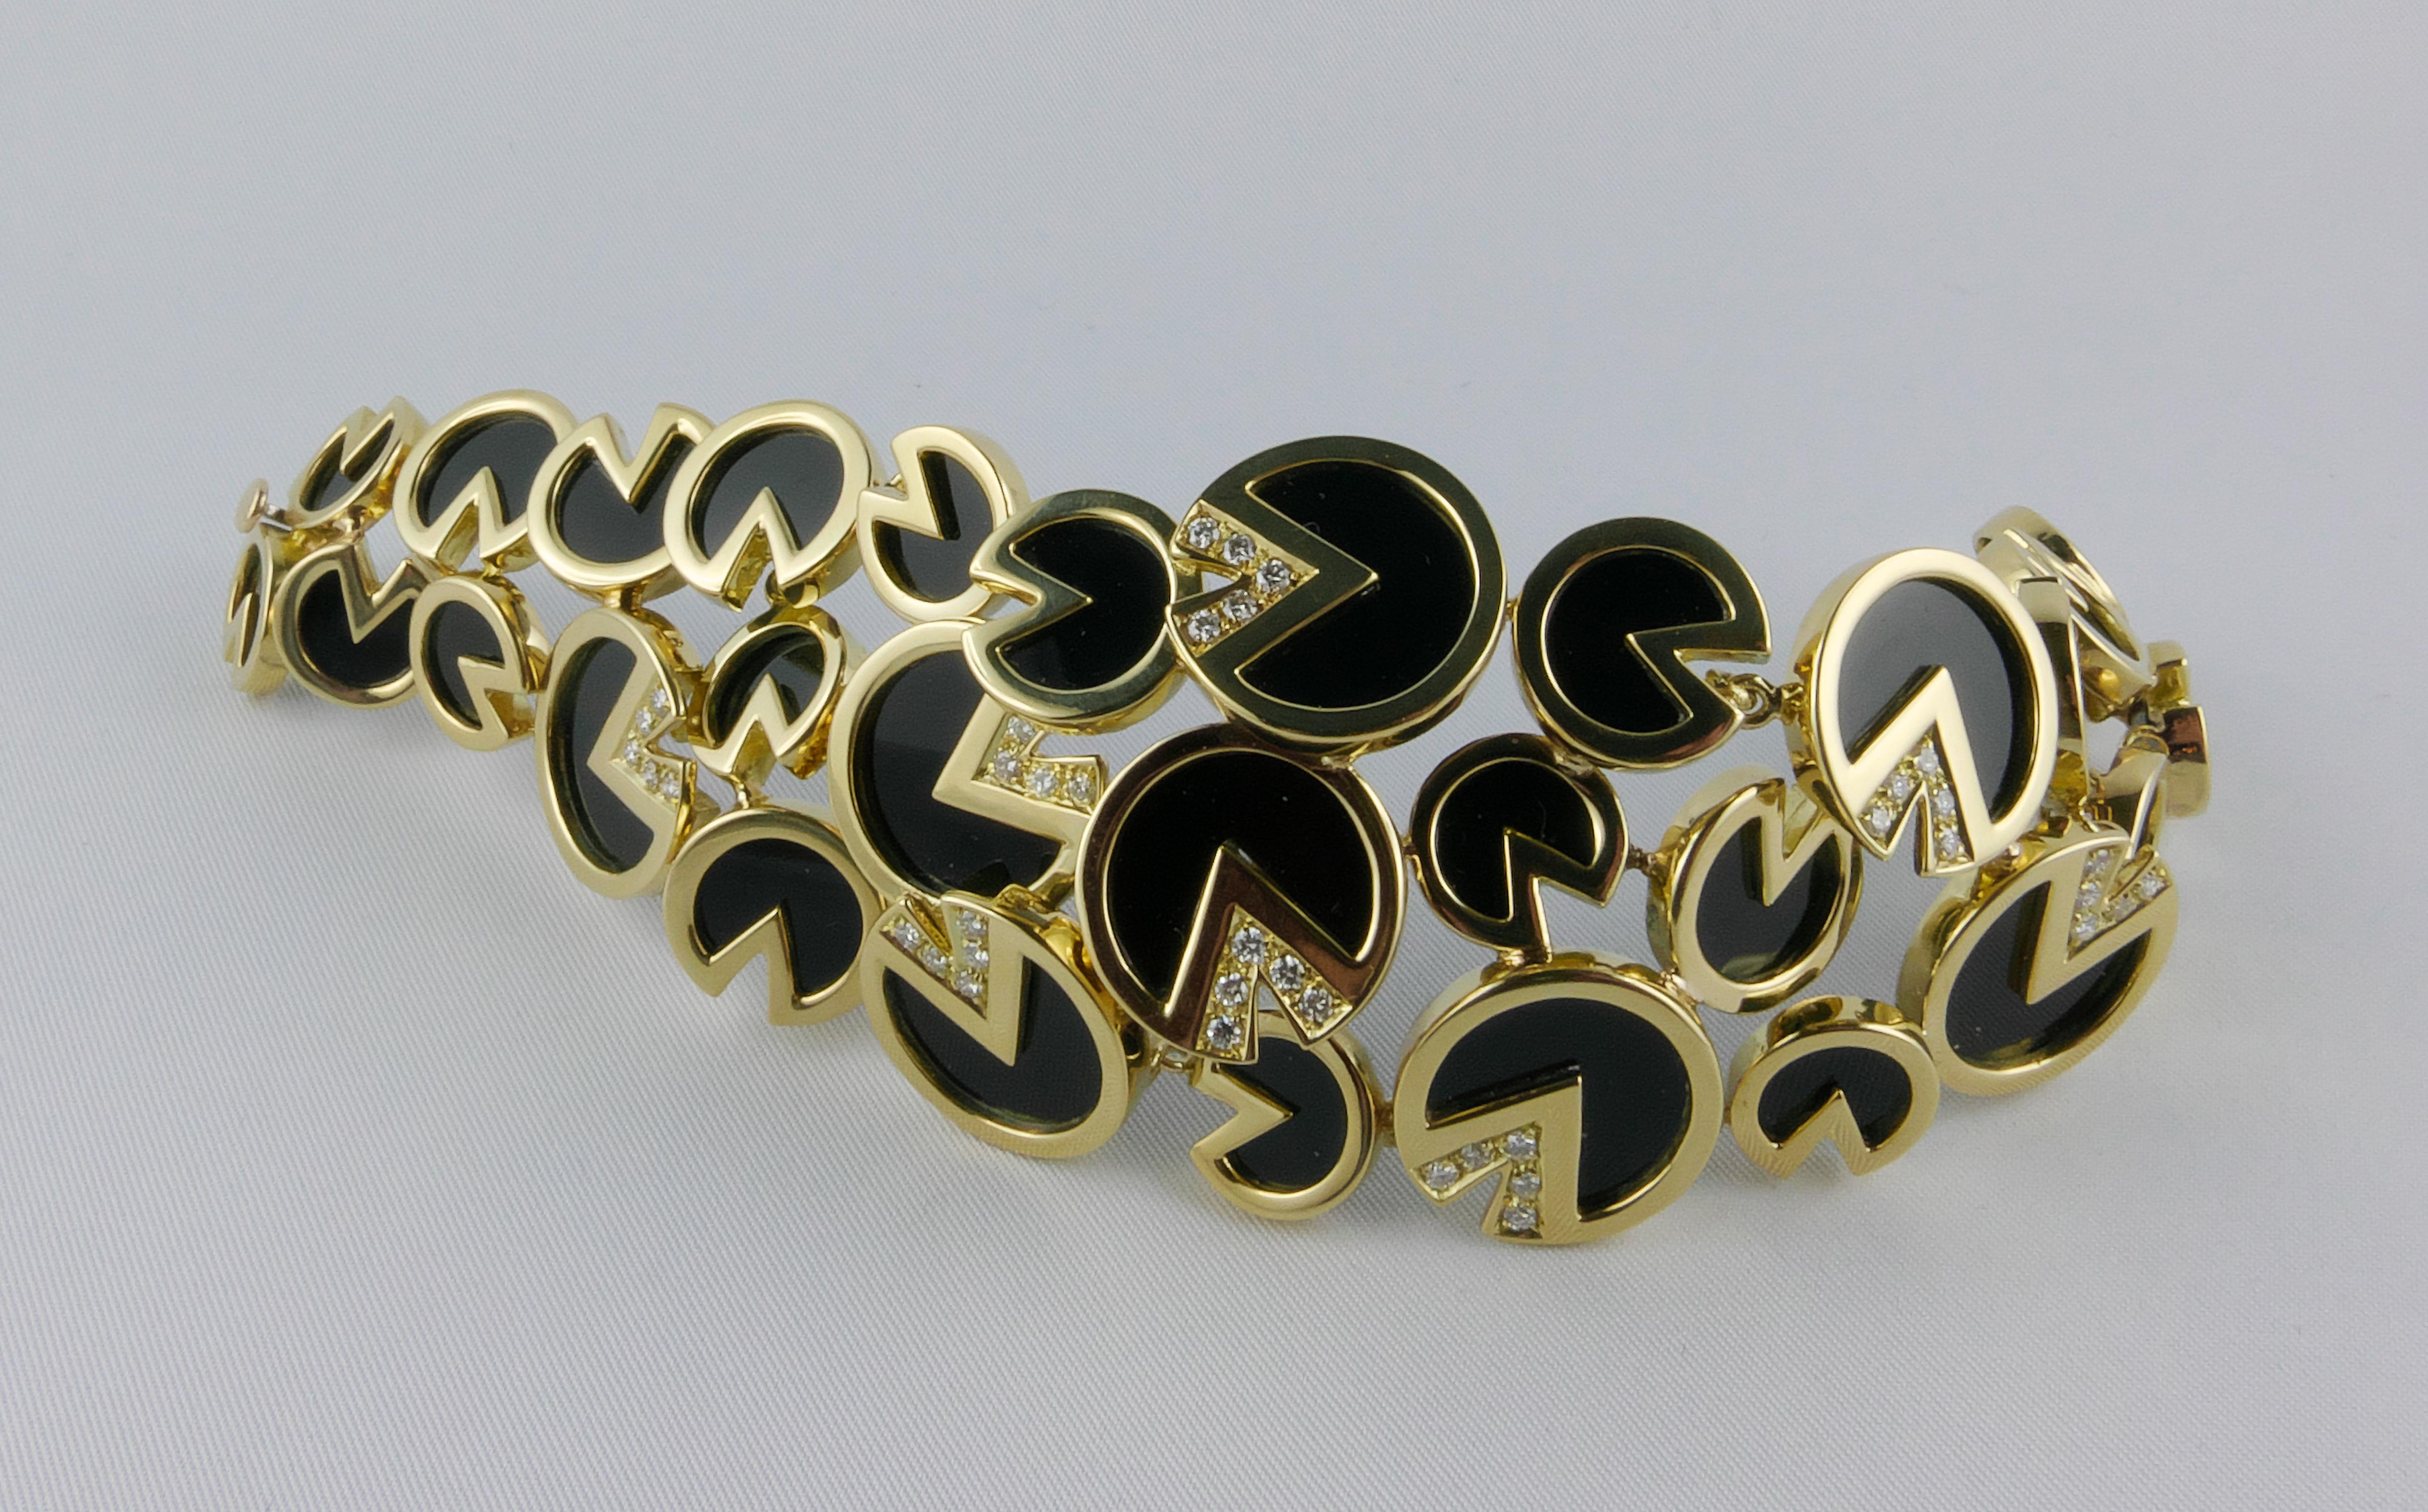 An exquisite  1970s very special Bracelet made with  geometric design in Yellow Gold, composed of 29 Onyx discs set in a multiple strand structure, all finely mounted on a base of 18K polished Gold, 7 of them decorated with V shaped bands of